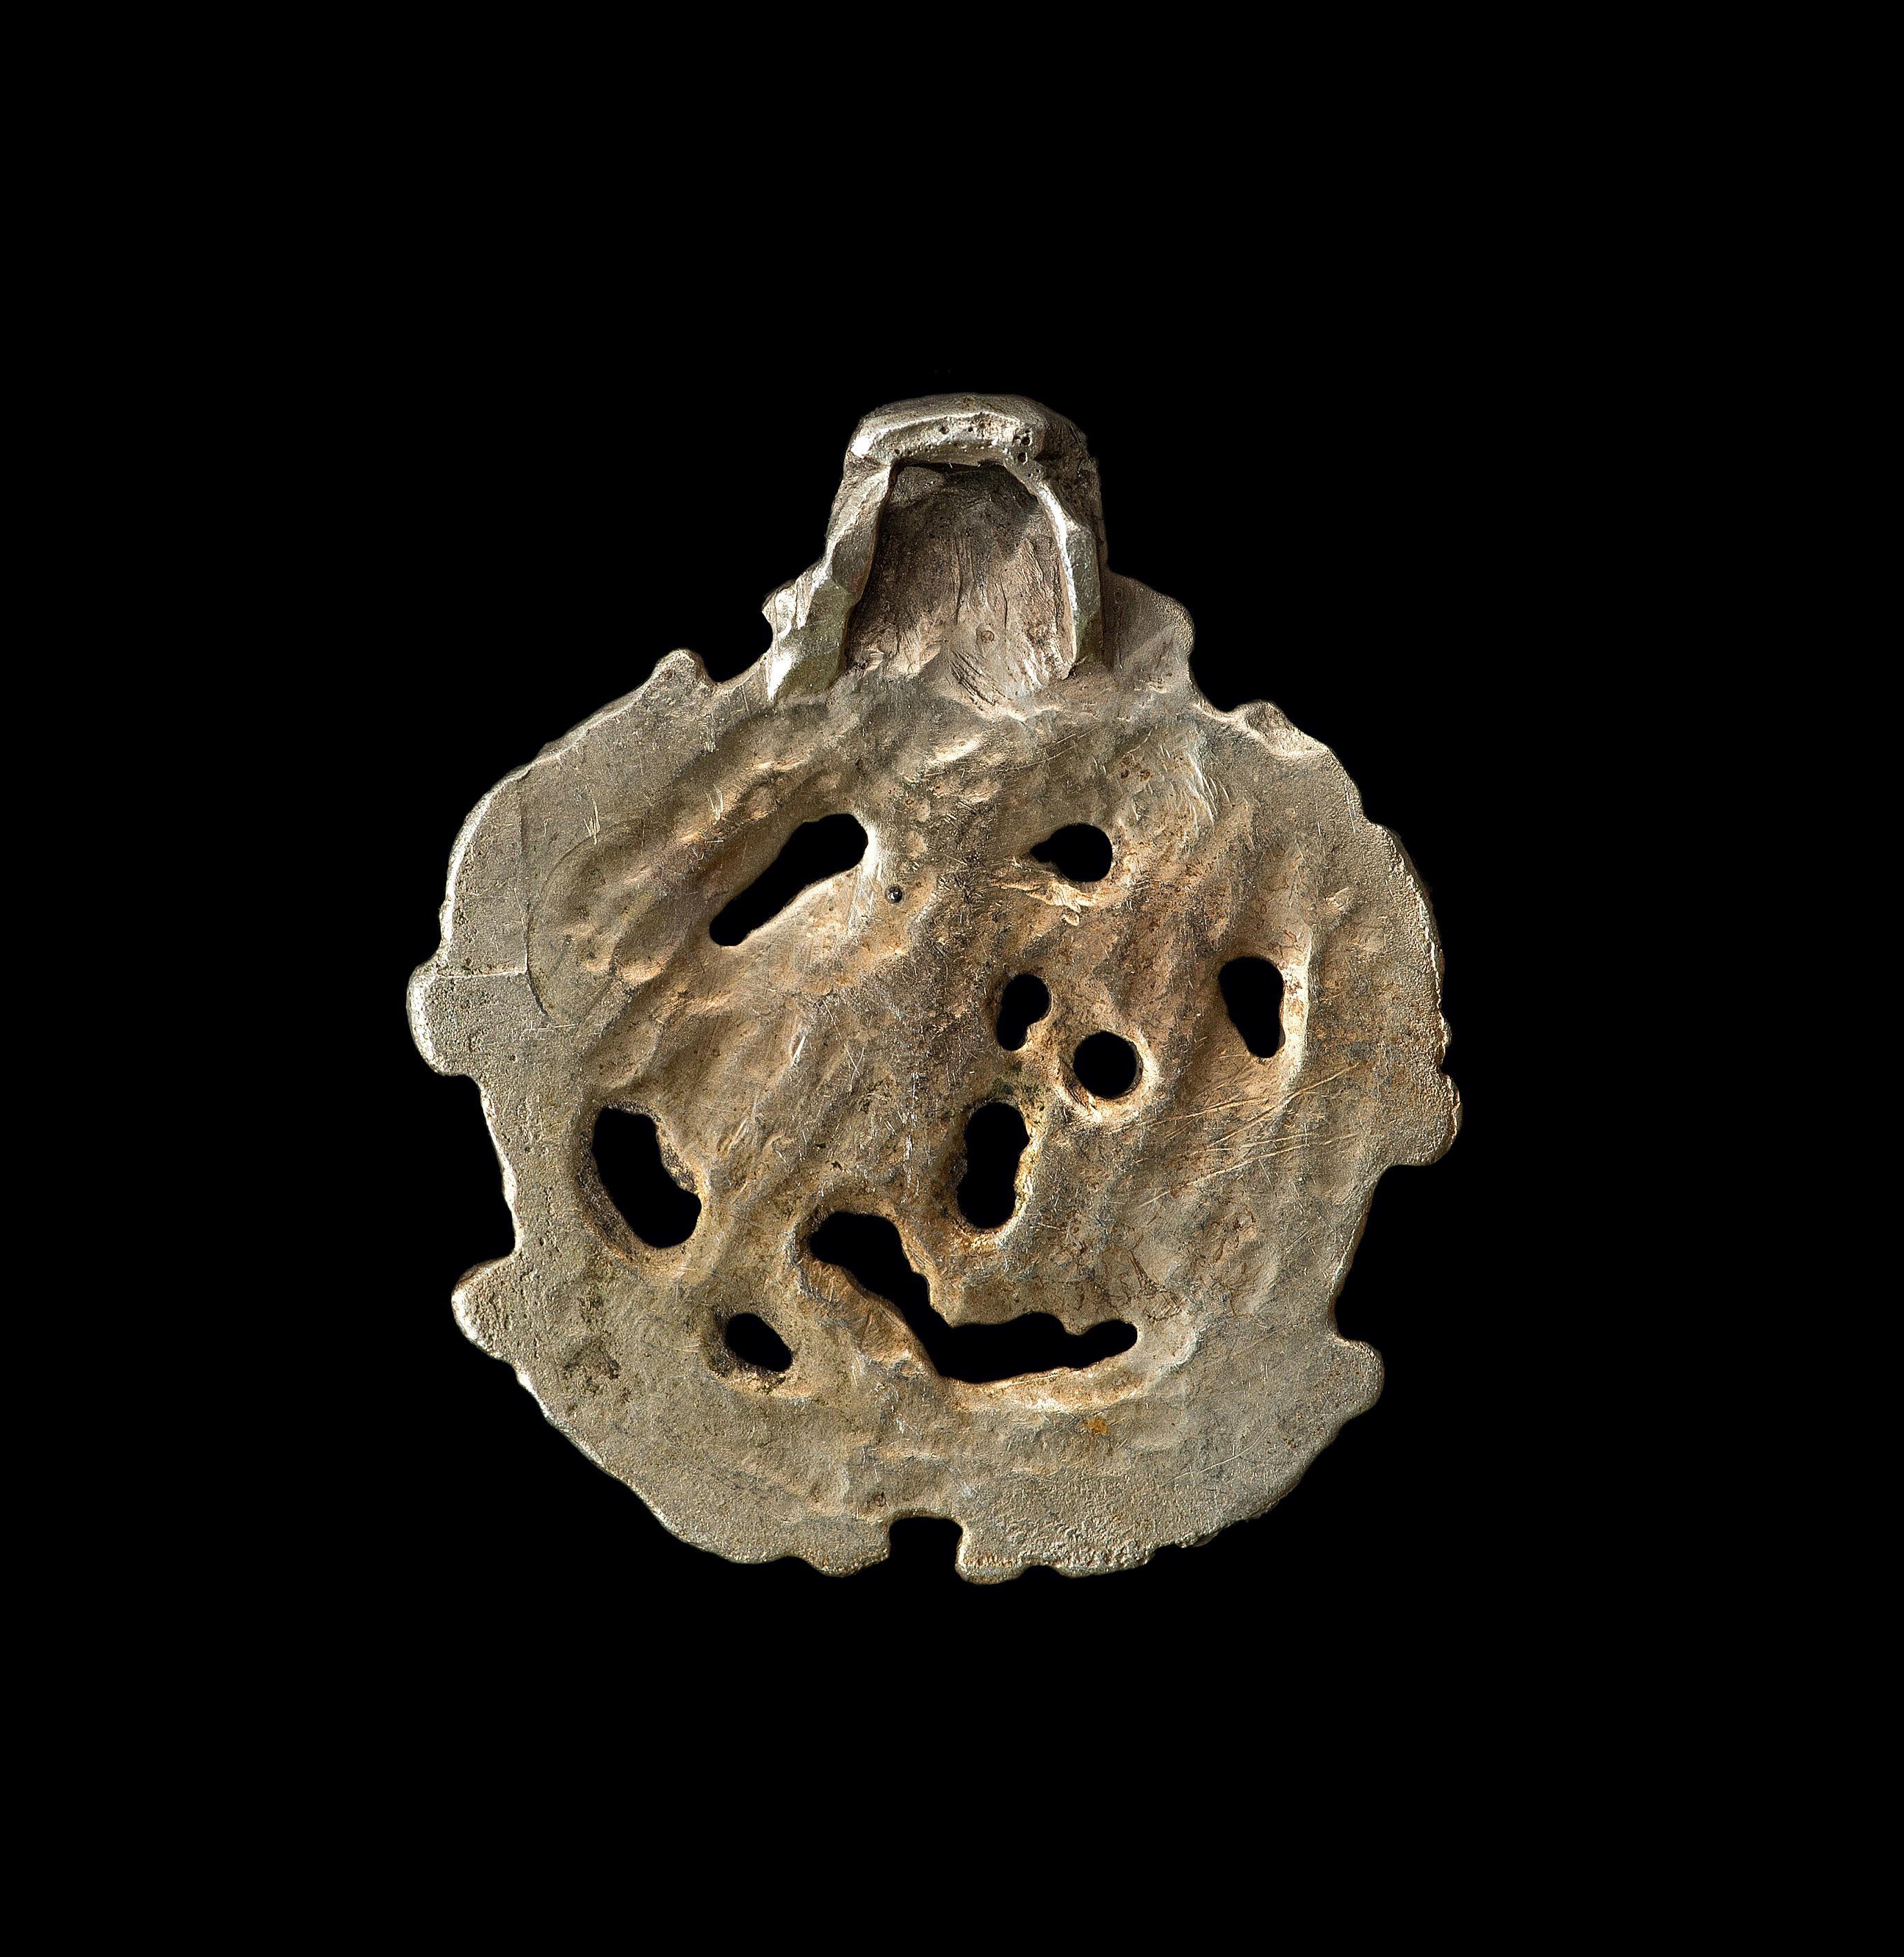 Origin: Viking inhabited area of Europe.

Gilt silver. A Borre-type concave-section pendant with integral suspension loop. The openwork plaque with three-band border and four beast-head panels, internal stylized zoomorphic beast.

Measures: